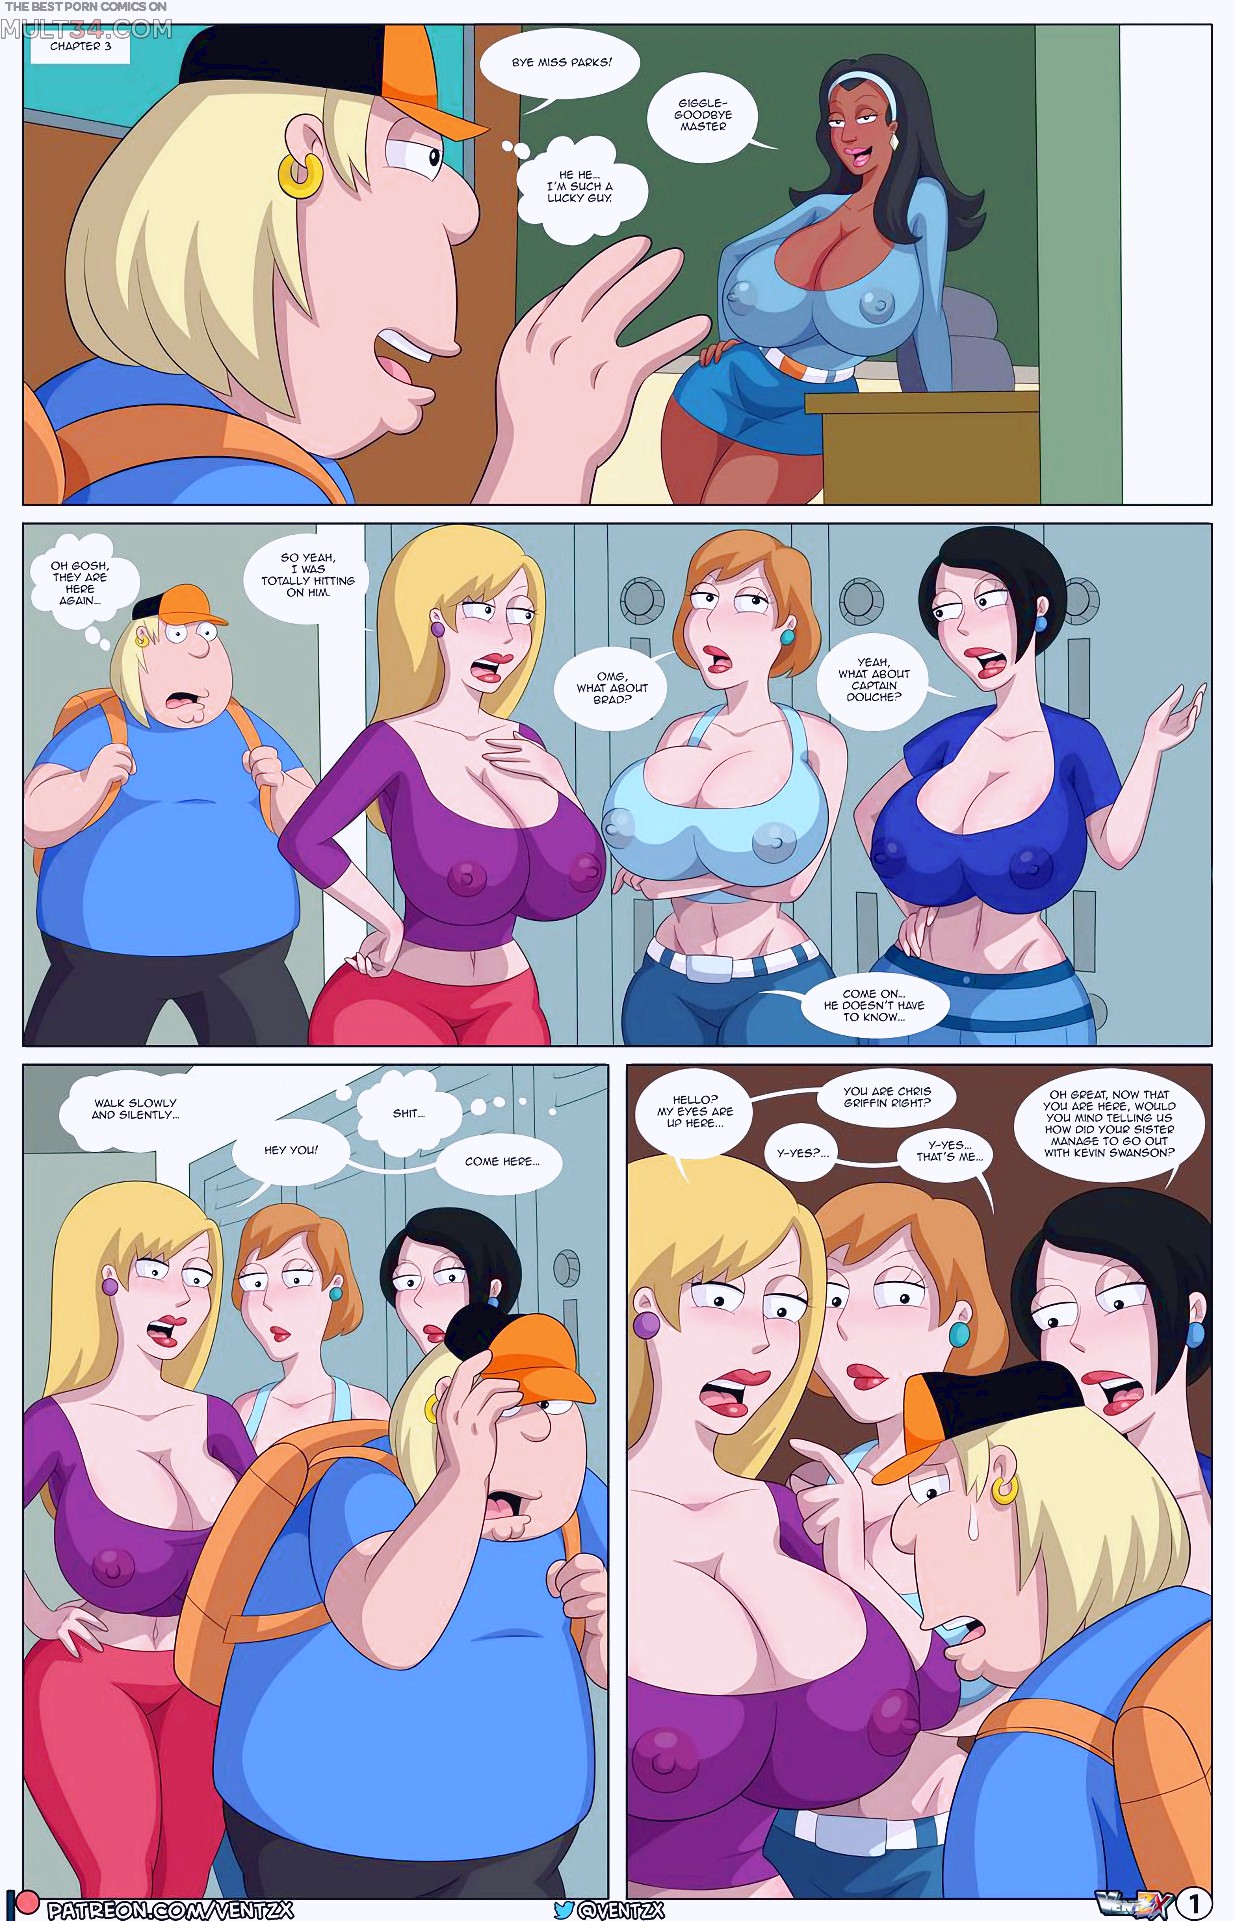 Quahog Diaries 3 porn comic page 01 on category Family Guy